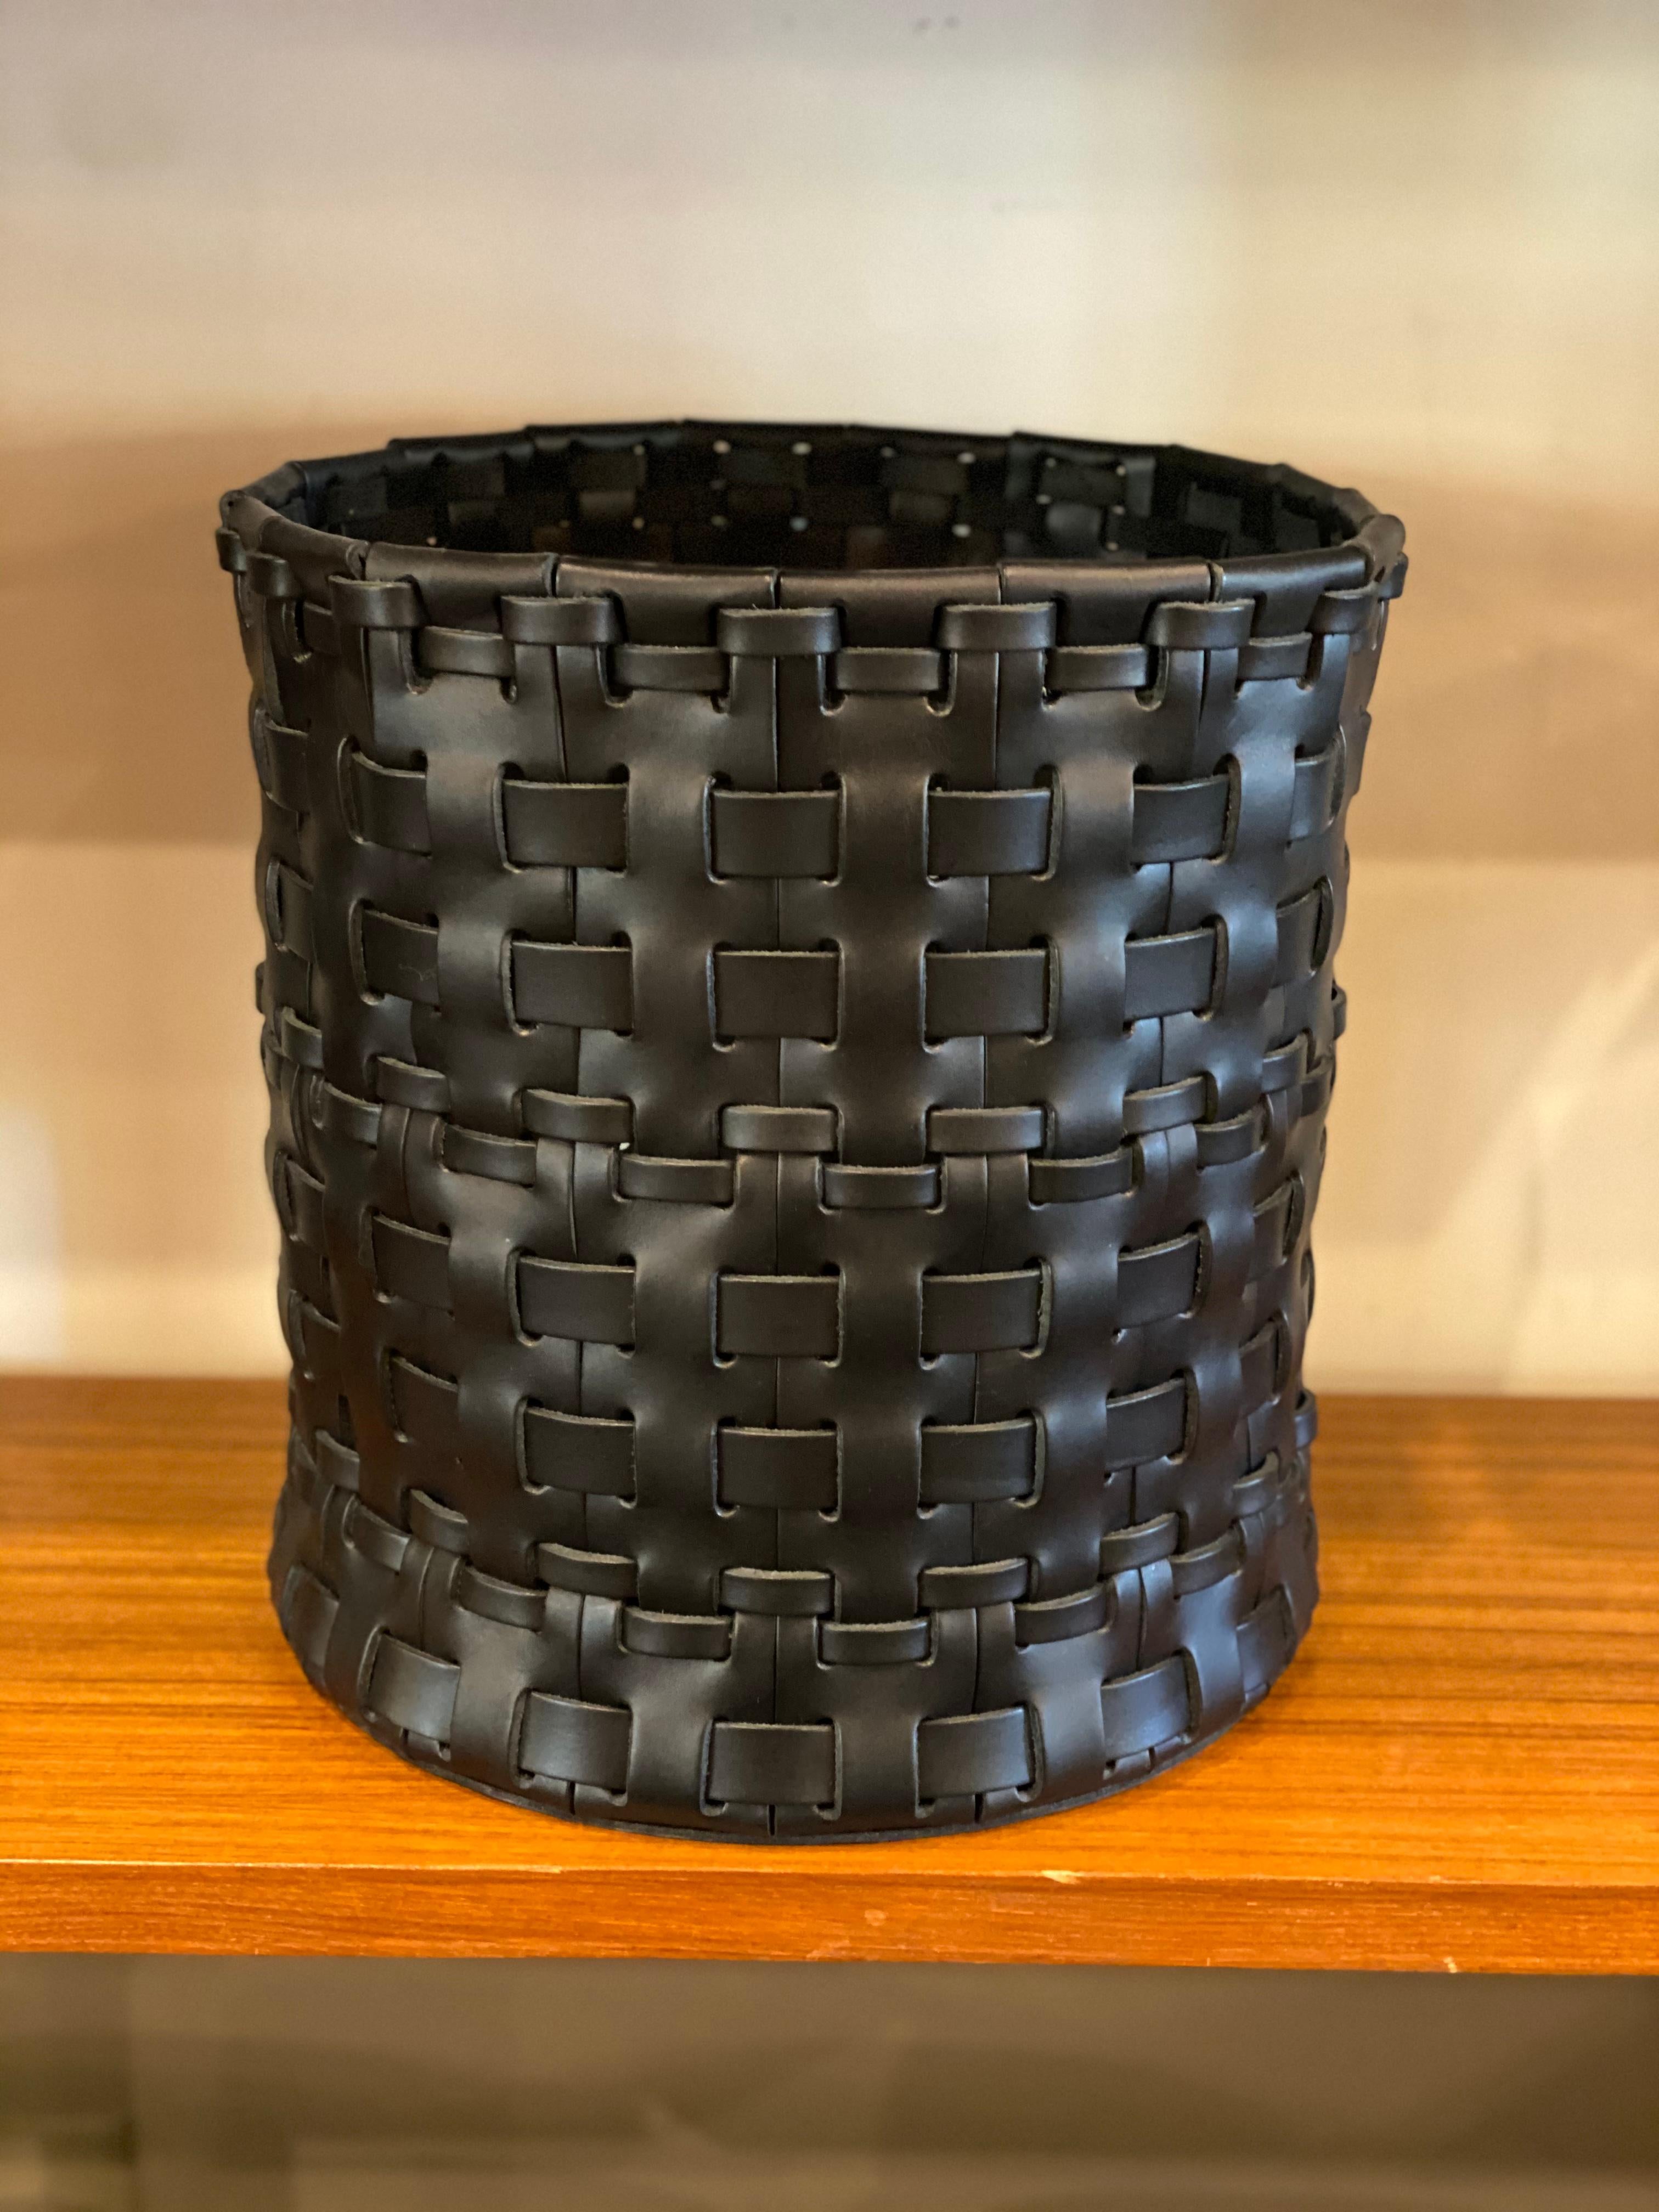 Handmade woven leather wastebasket by Oscar Maschera. Three baskets available in color elm and one available in black.

Artist turned artisan, Oscar Maschera exclusively uses genuine Italian leather, treated with natural extracts and dyed in